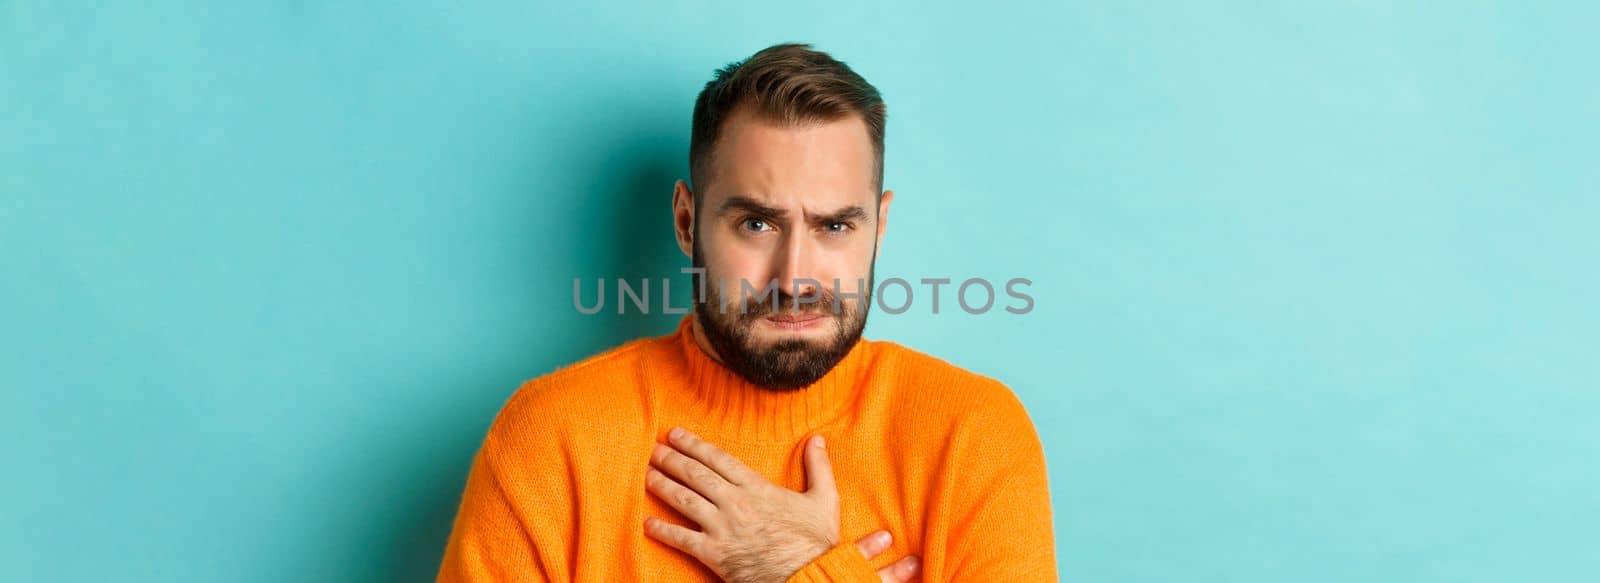 Close-up of shocked and startled man touching chesk, looking displeased and worried, standing against light blue background.